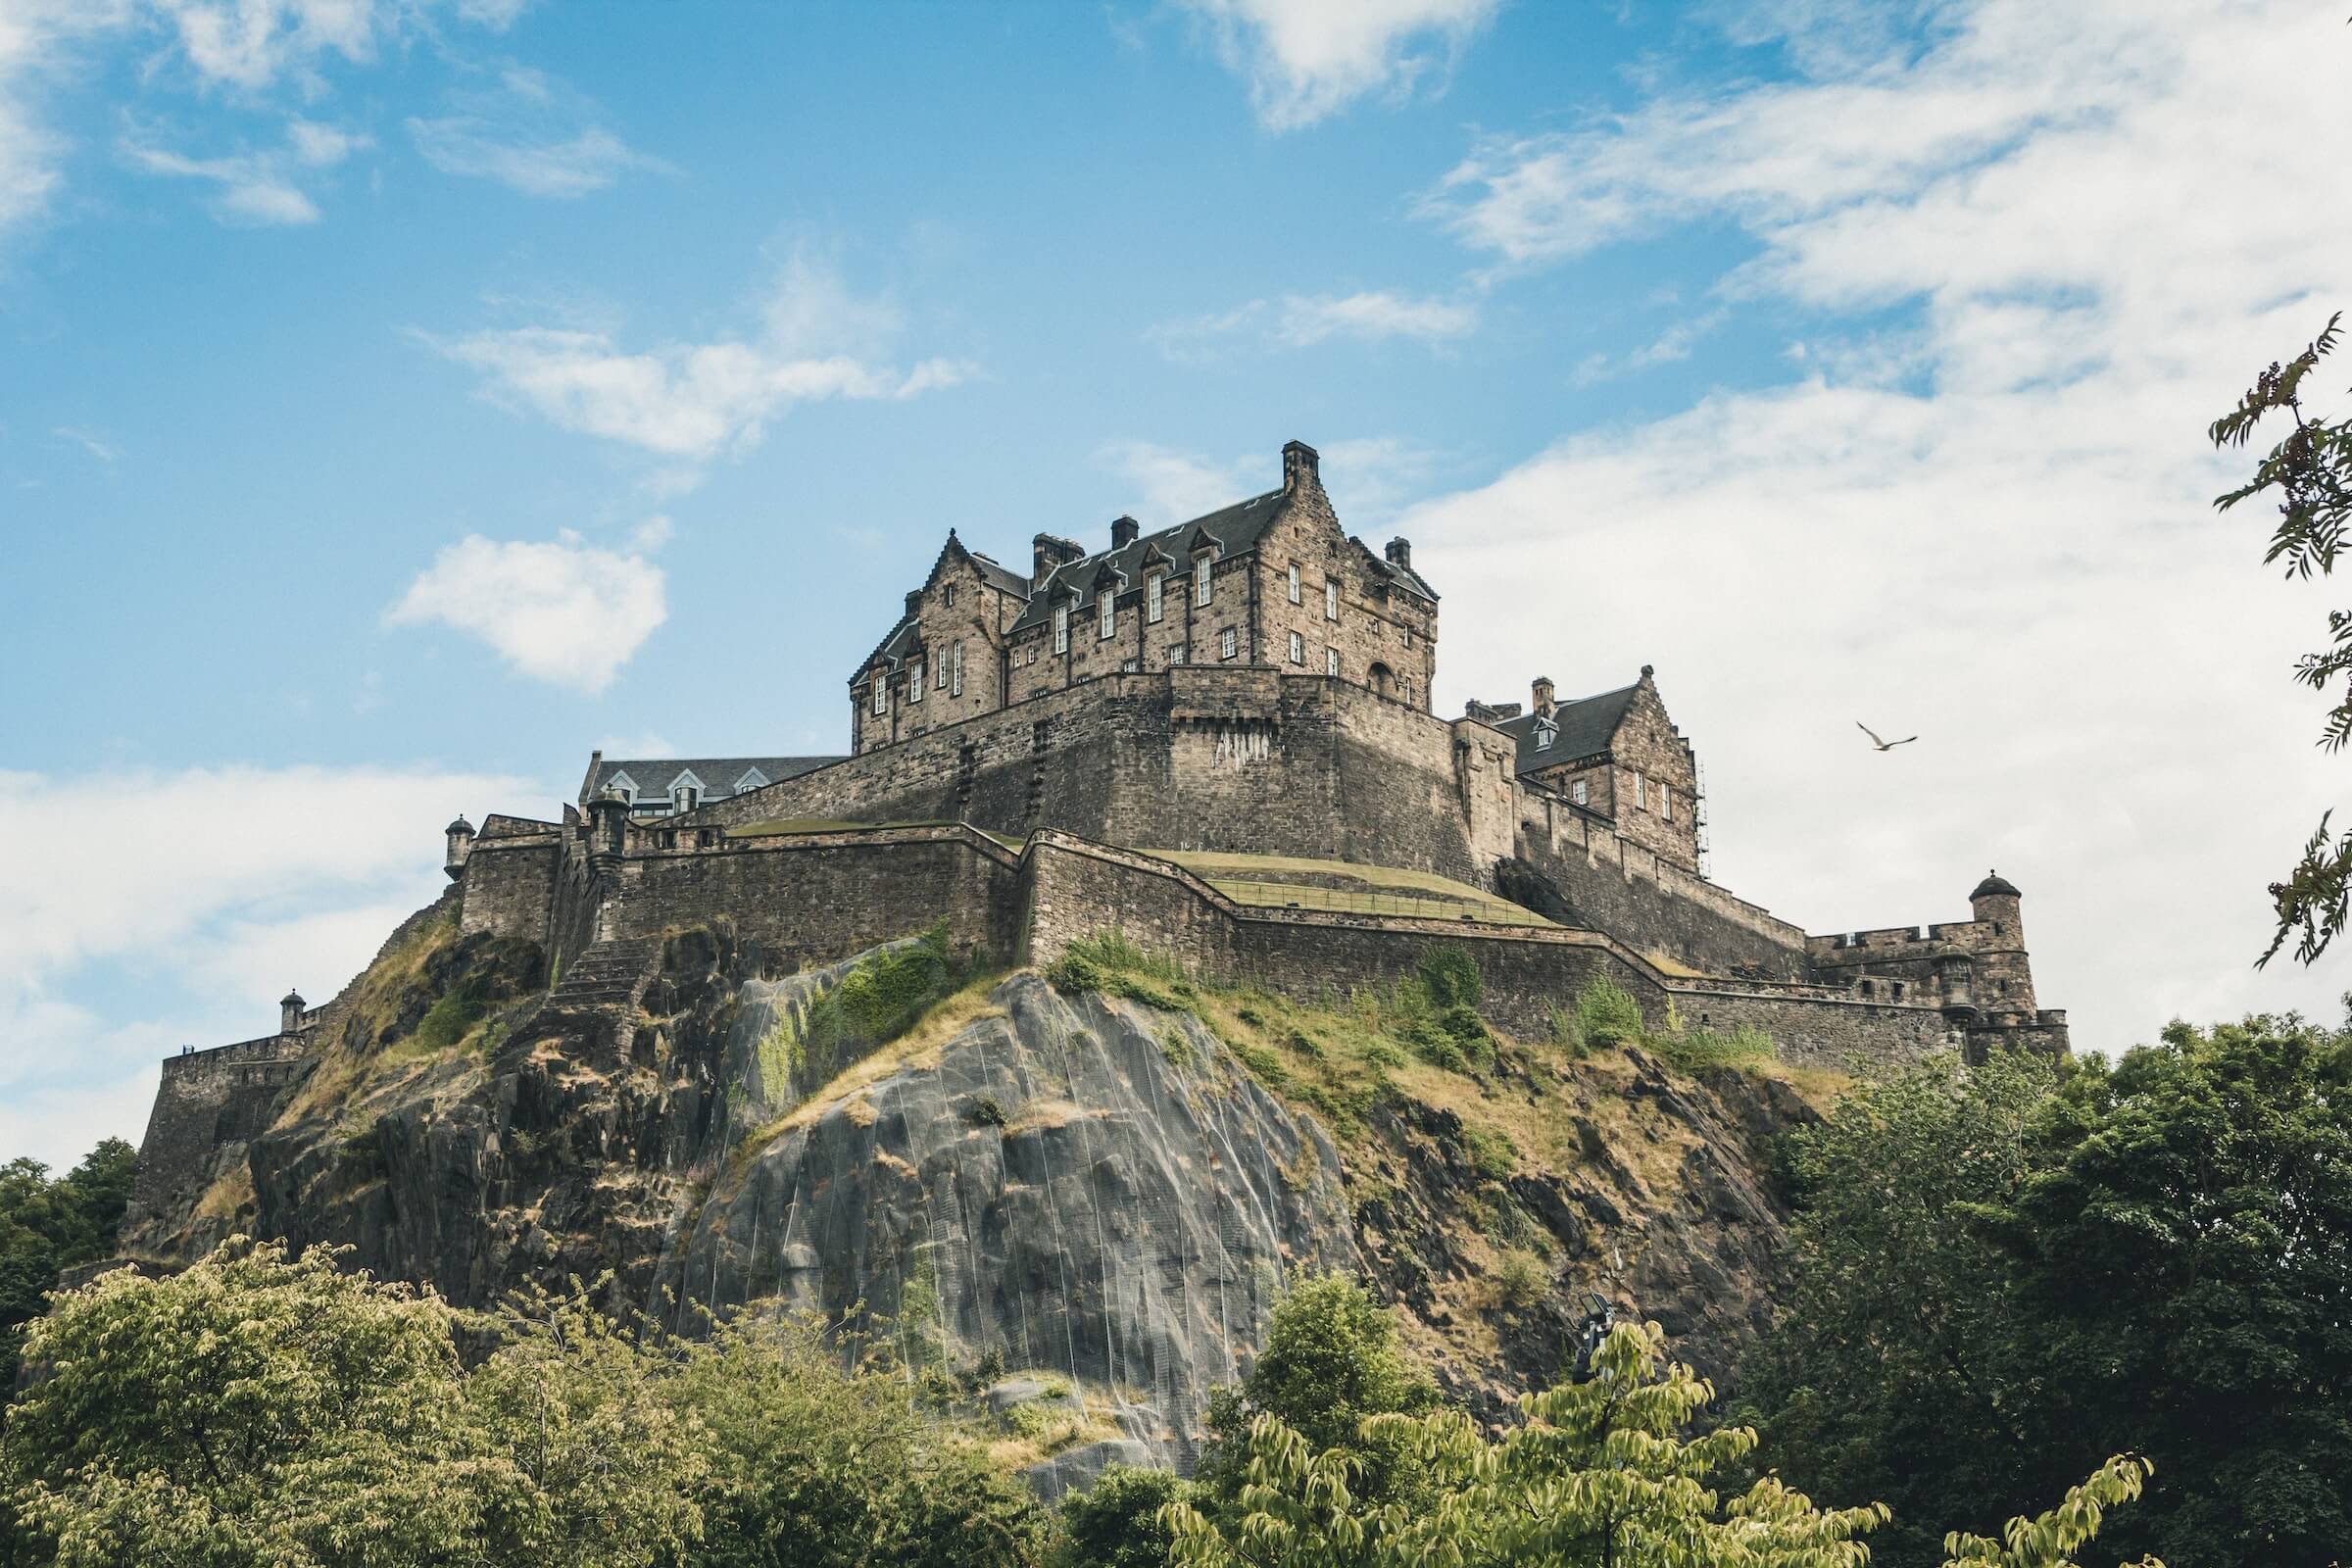 24 hours in Edinburgh. This is an image of Edinburgh from the ground. The castle sits on a hill and has a panoramic view of Edinburgh's cityscape.